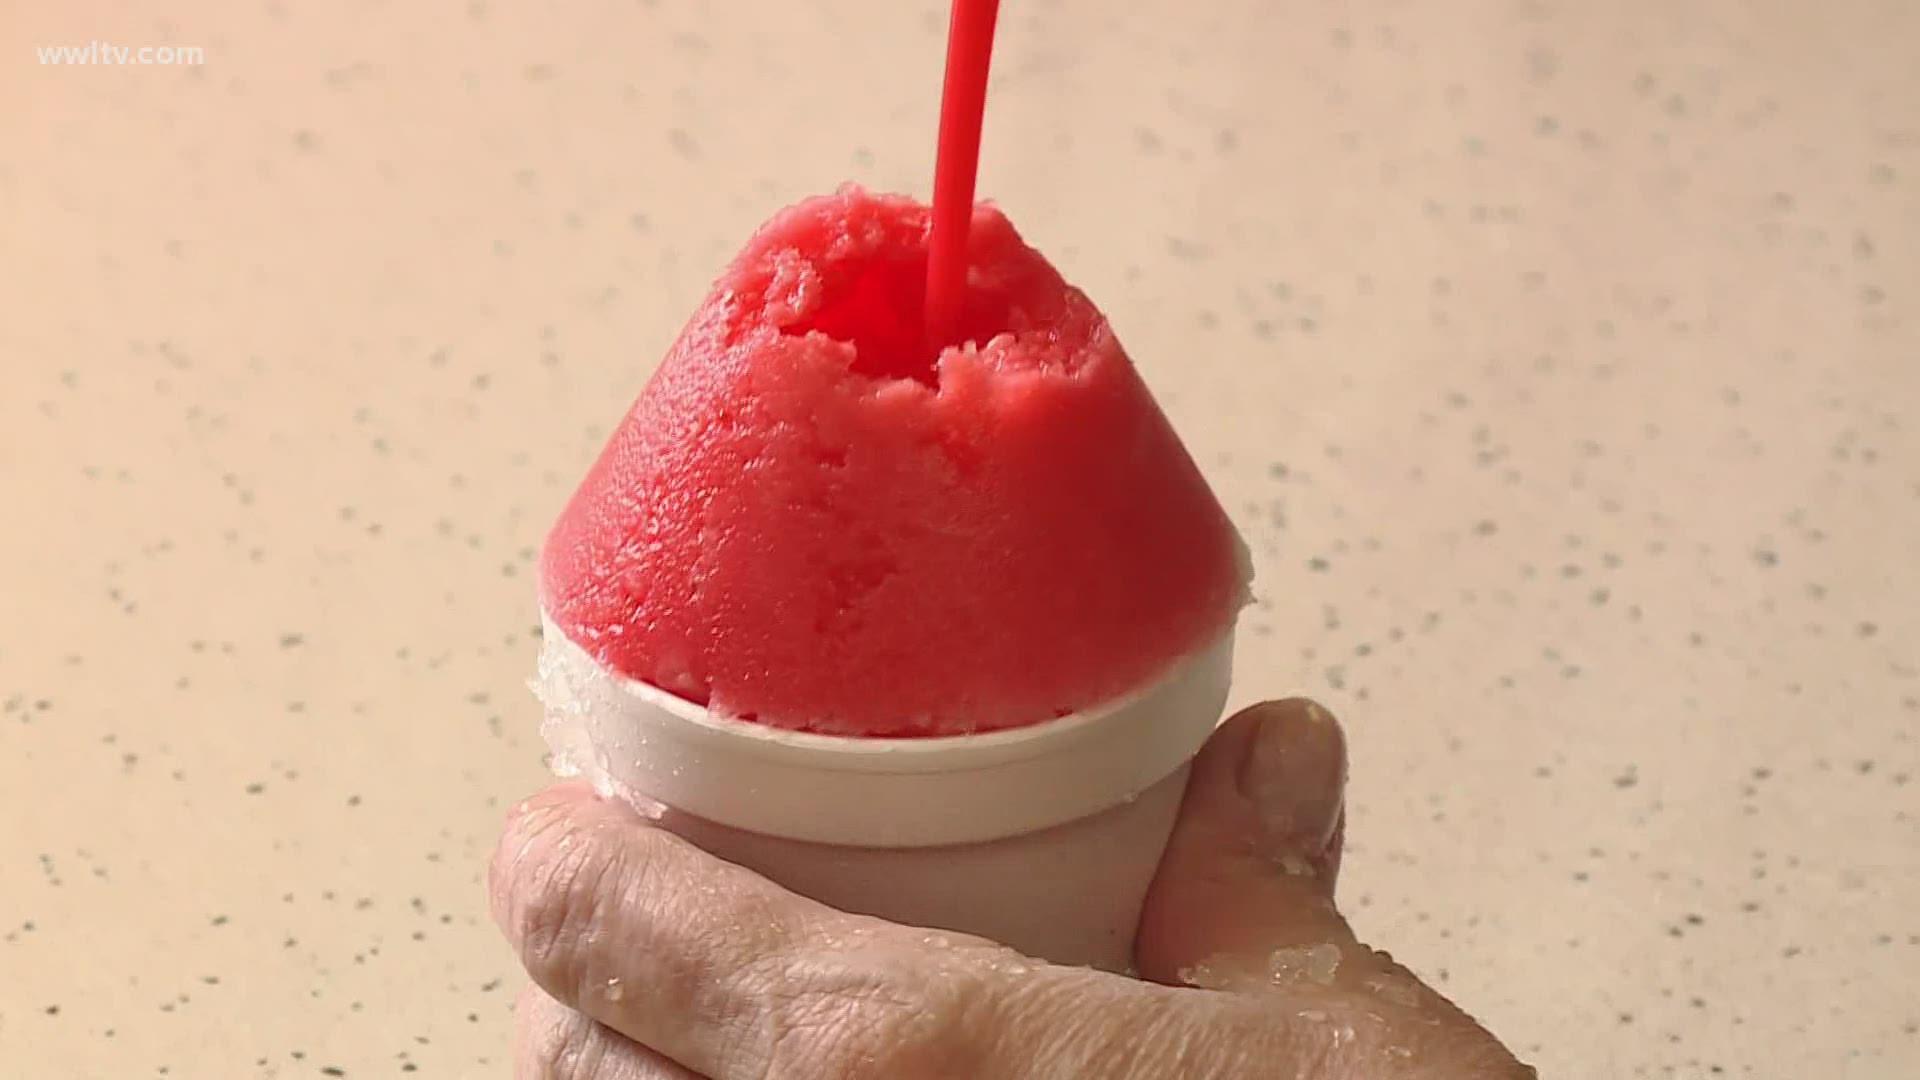 Sal's snowballs is celebrating 60 years of excellence in making New Orleans' trademark treat.